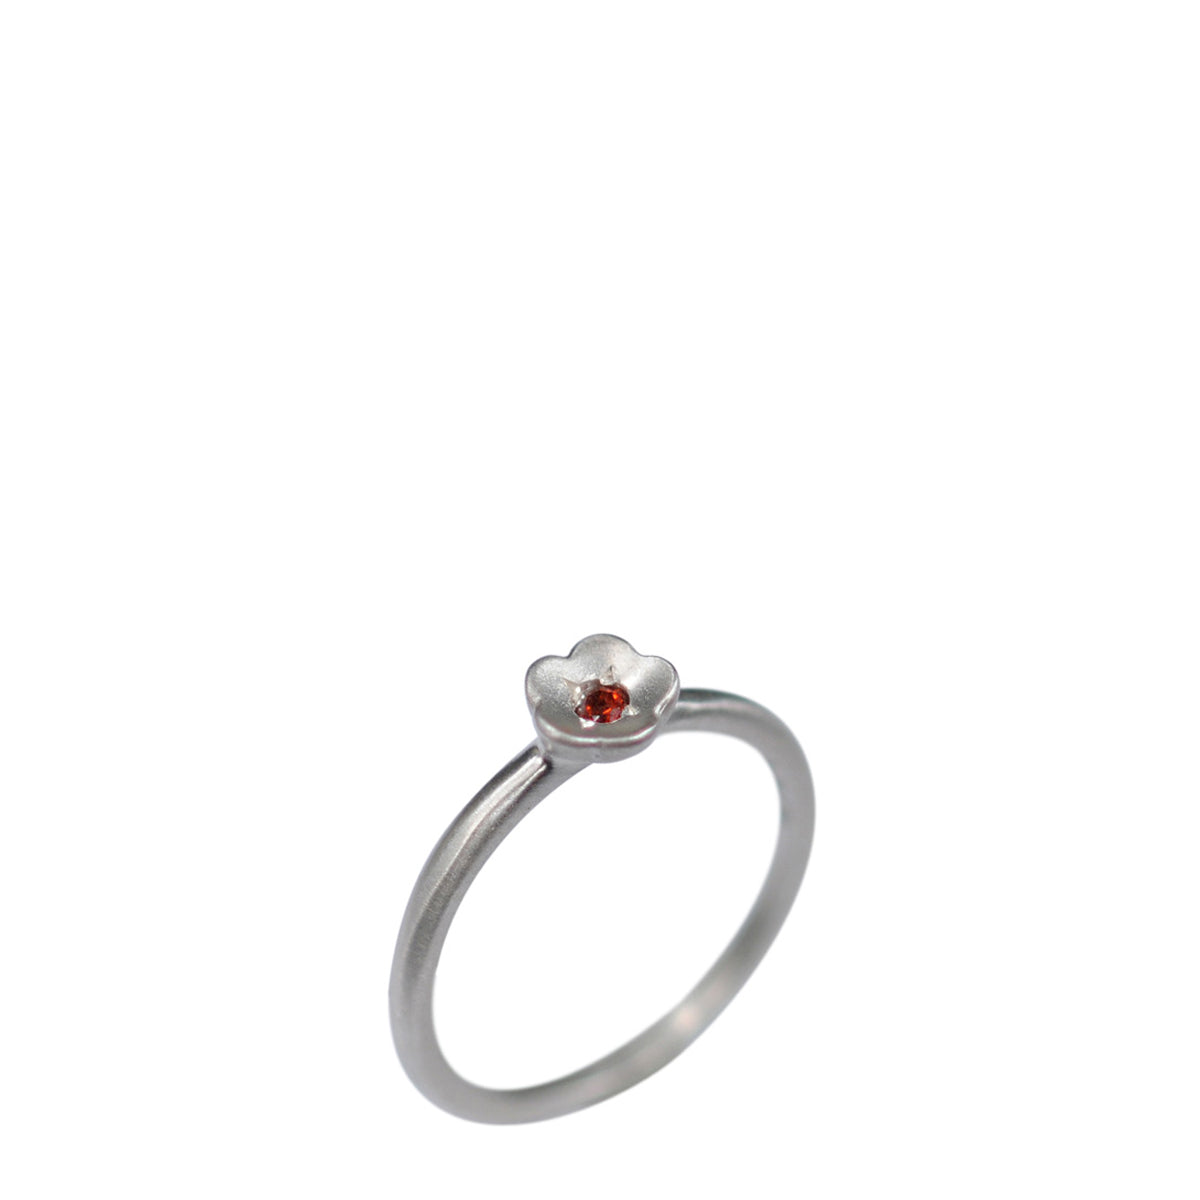 Sterling Silver Buttercup Ring with Garnet